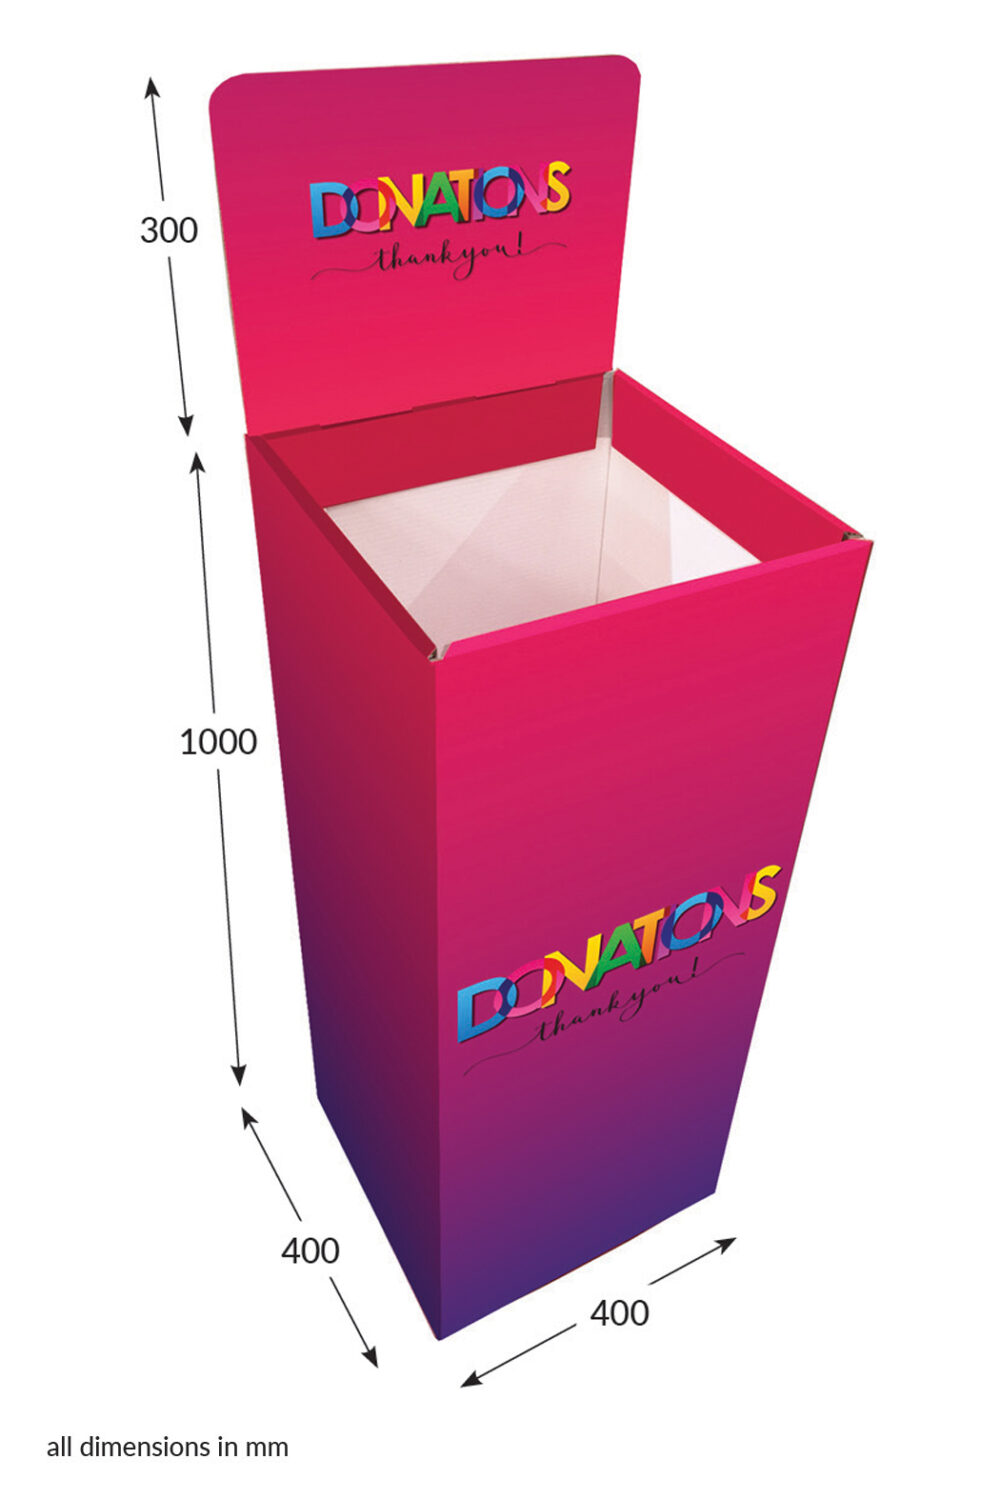 Featured image for “Square Dump Bin with Header - Donations (Pink)”